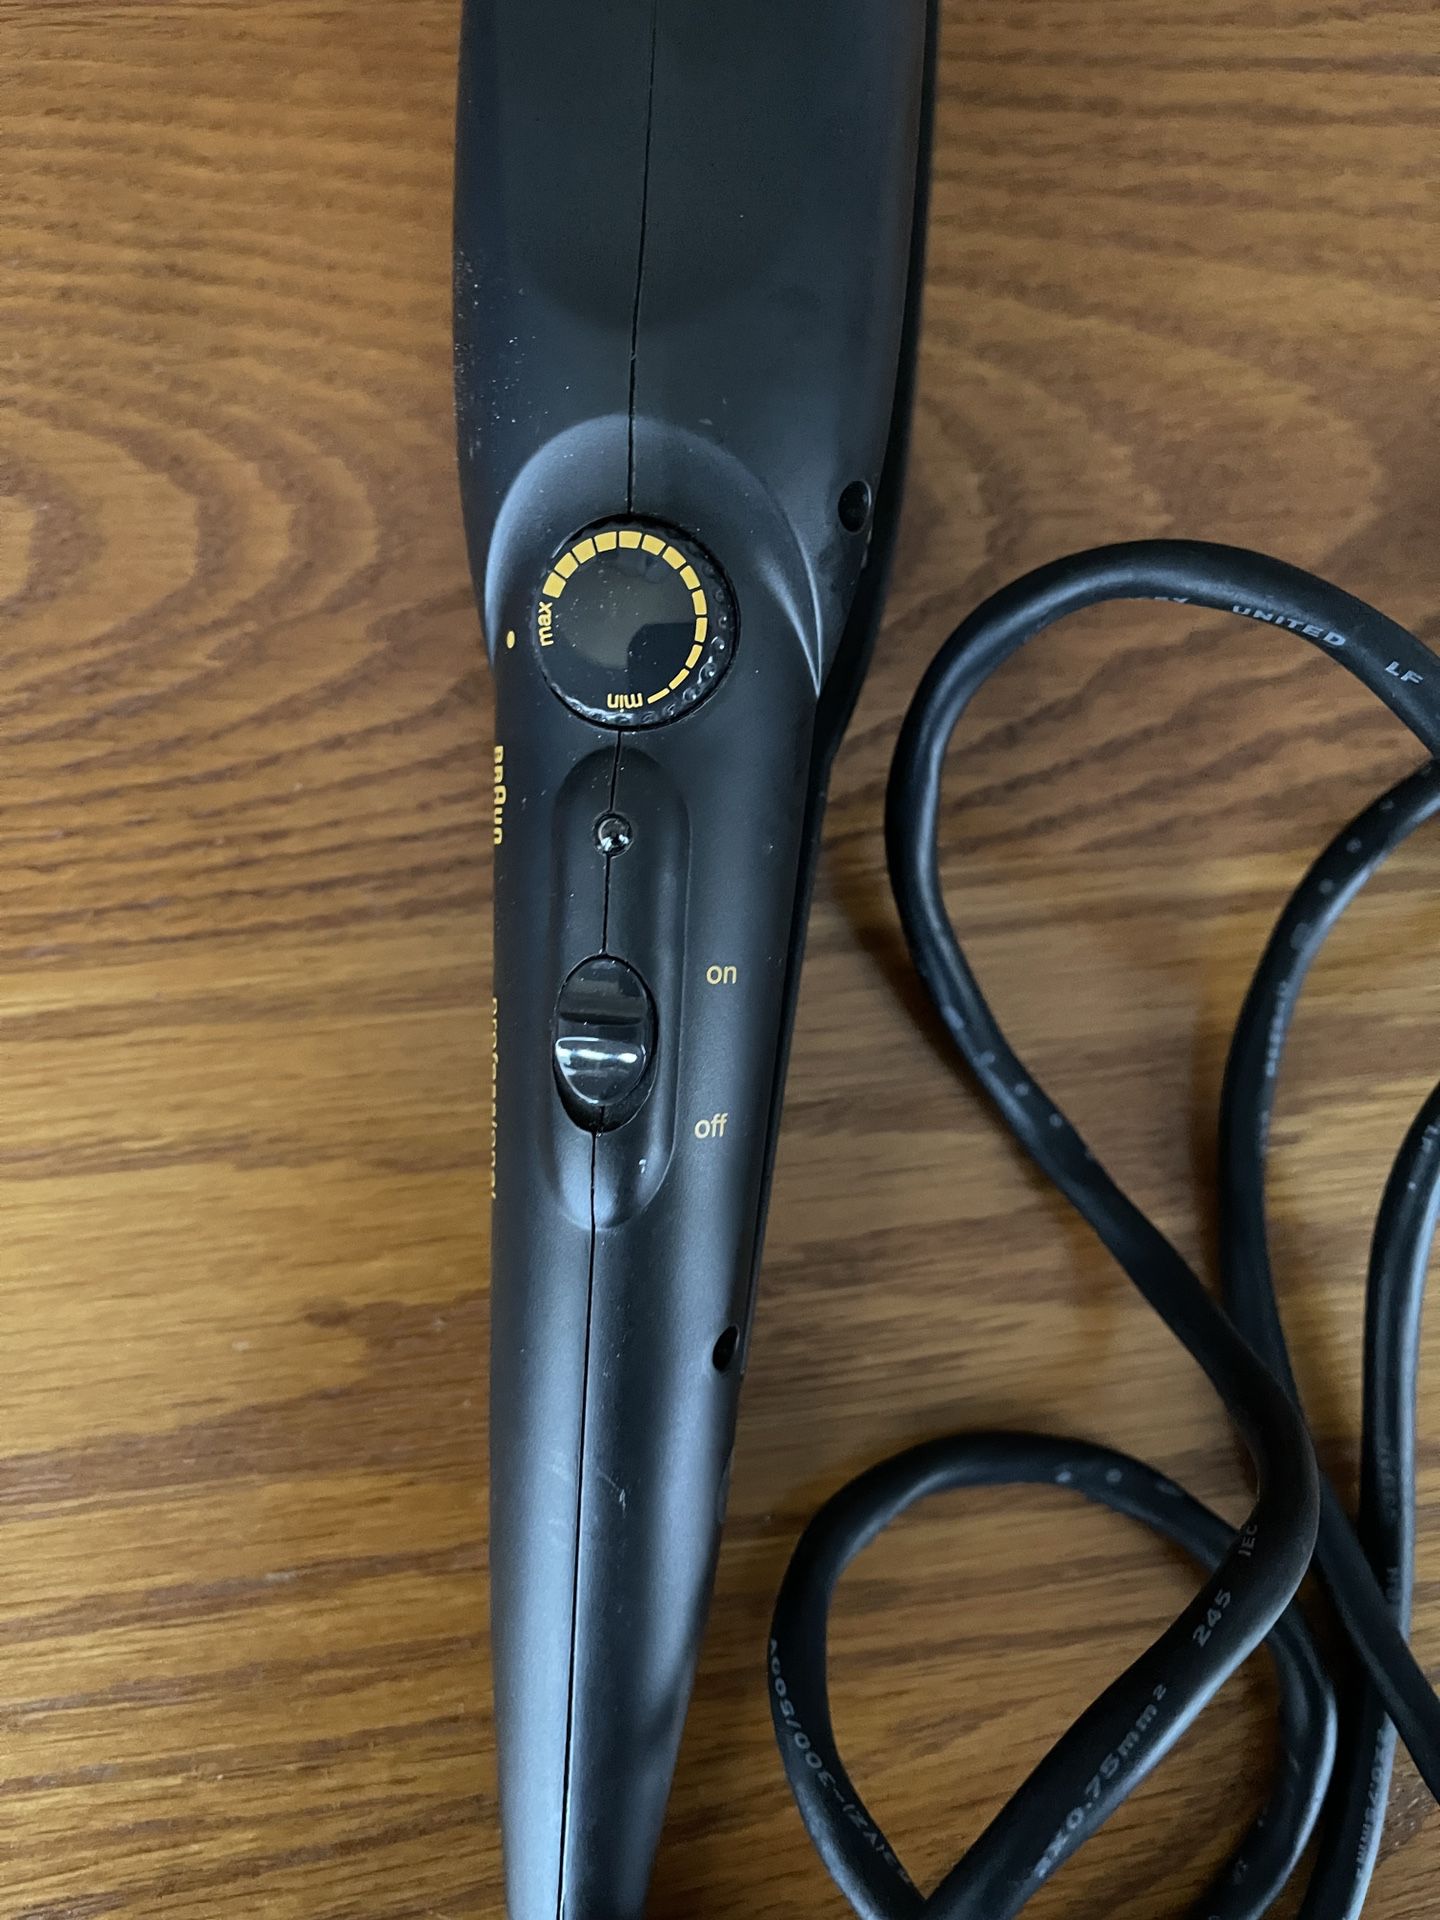 Braun Professional Hair Straightener For Use In Europe 220-240 V